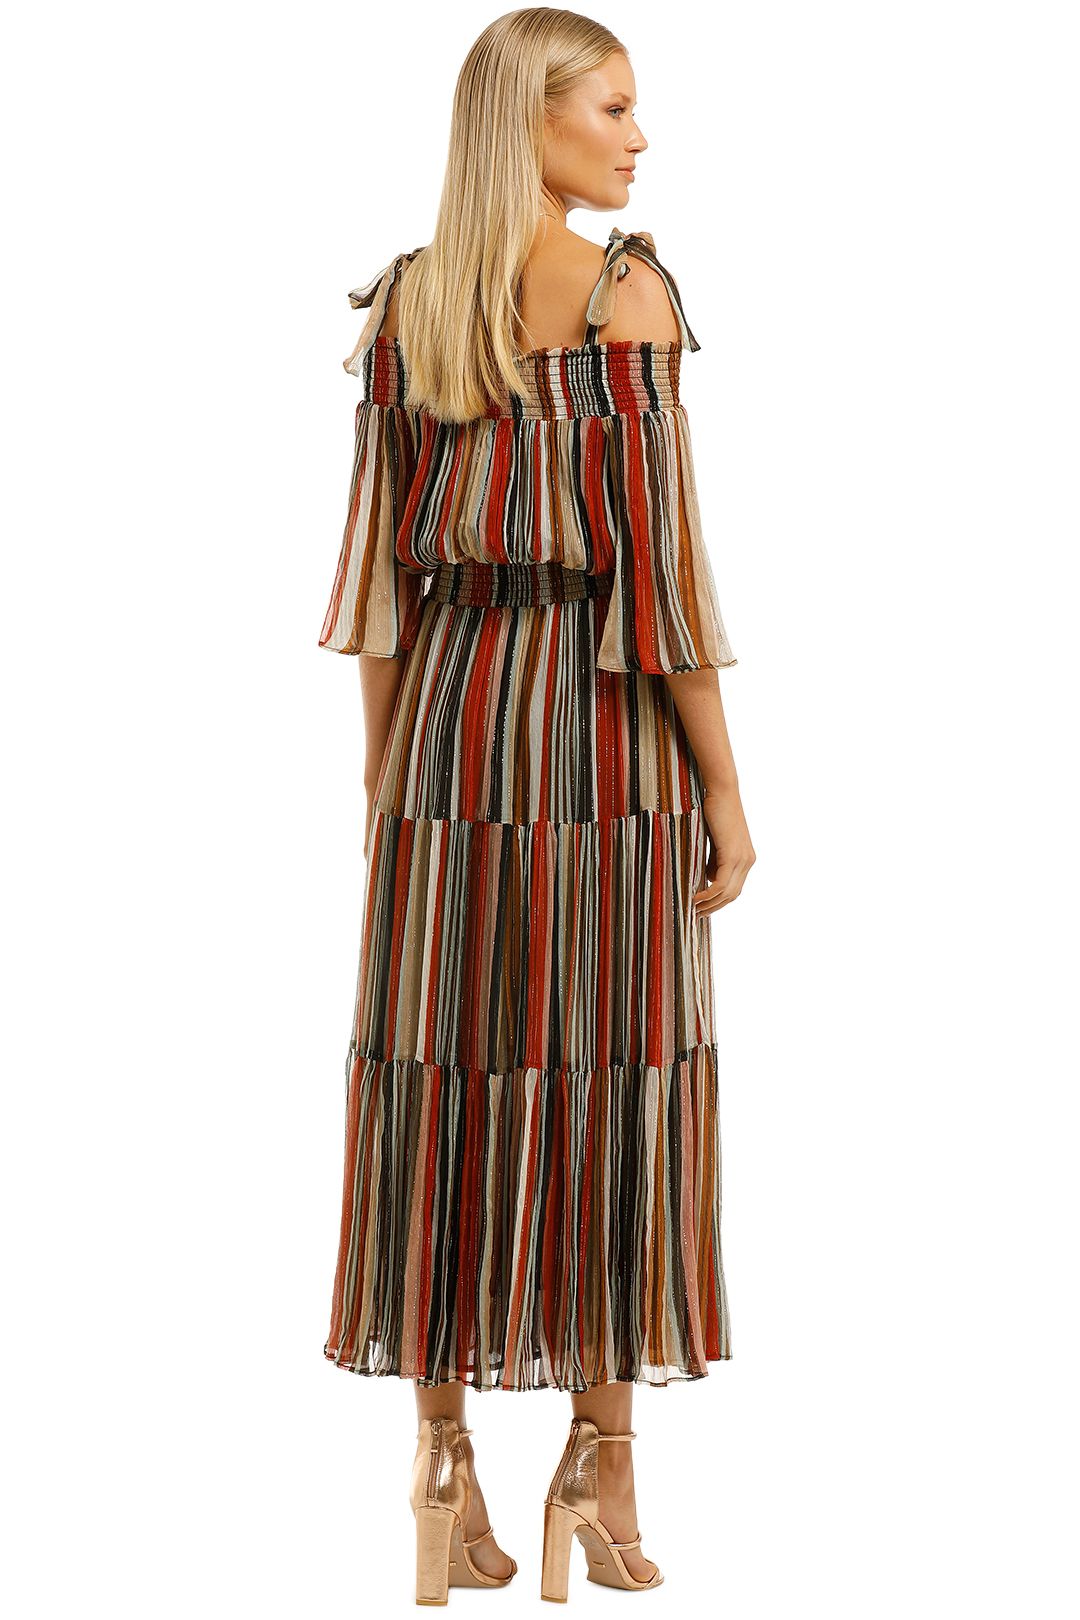 Epoque Maxi Dress by Ginger and Smart ...